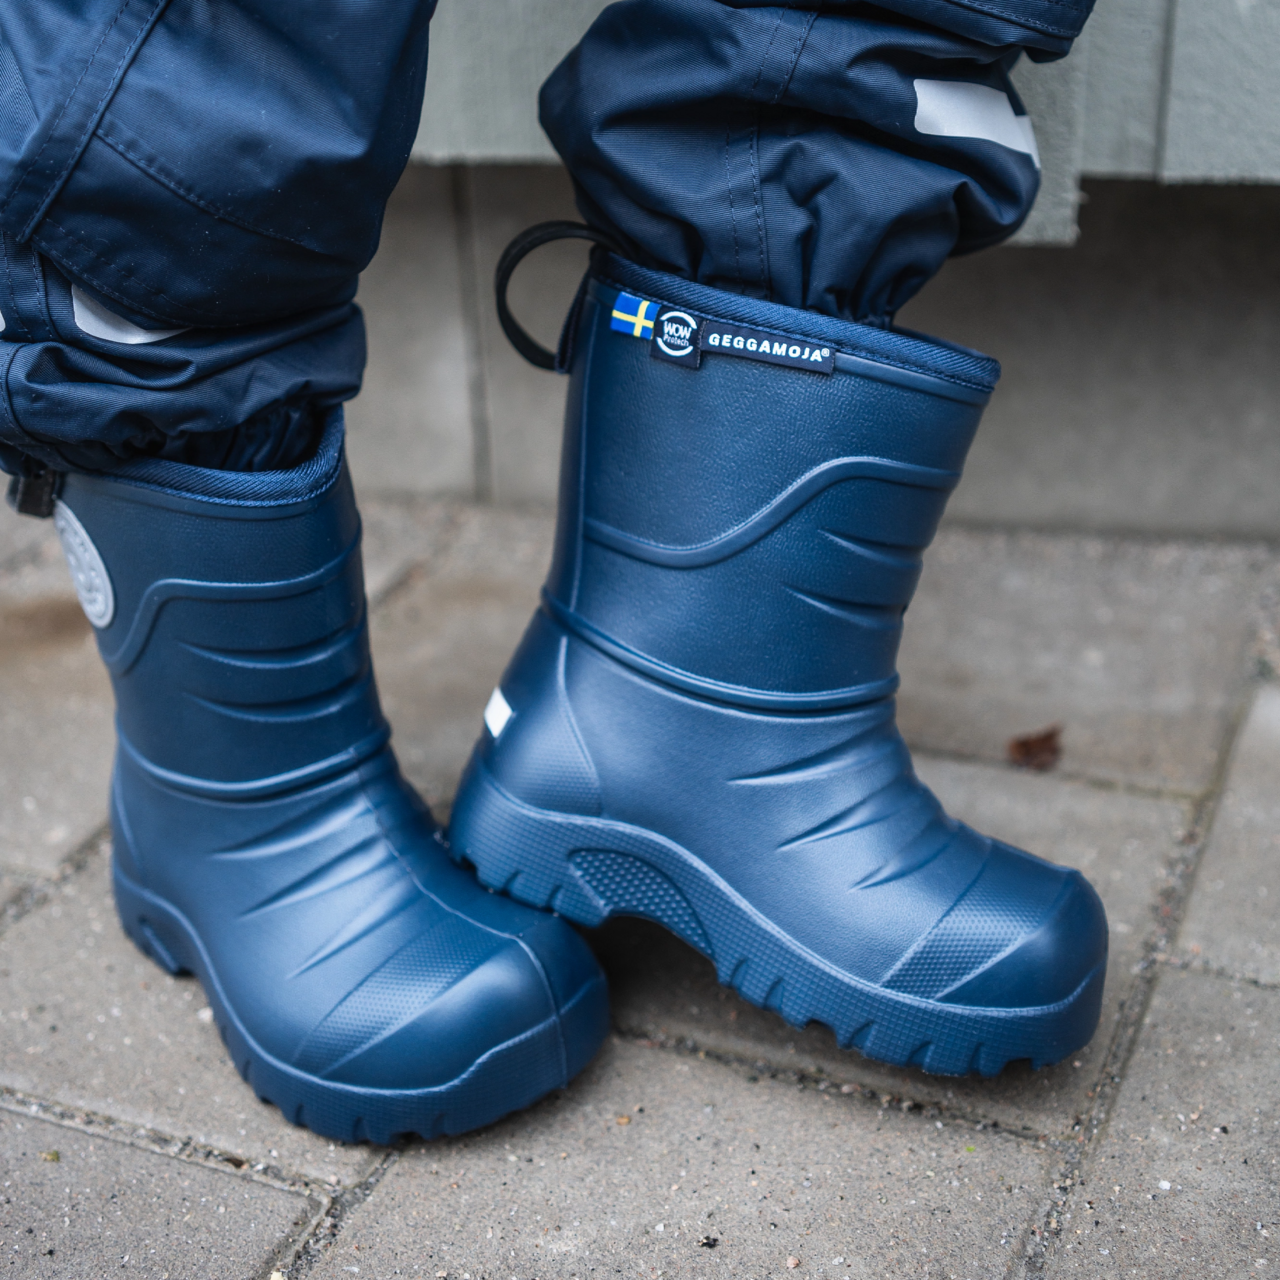 All-weather Boot Navy  34